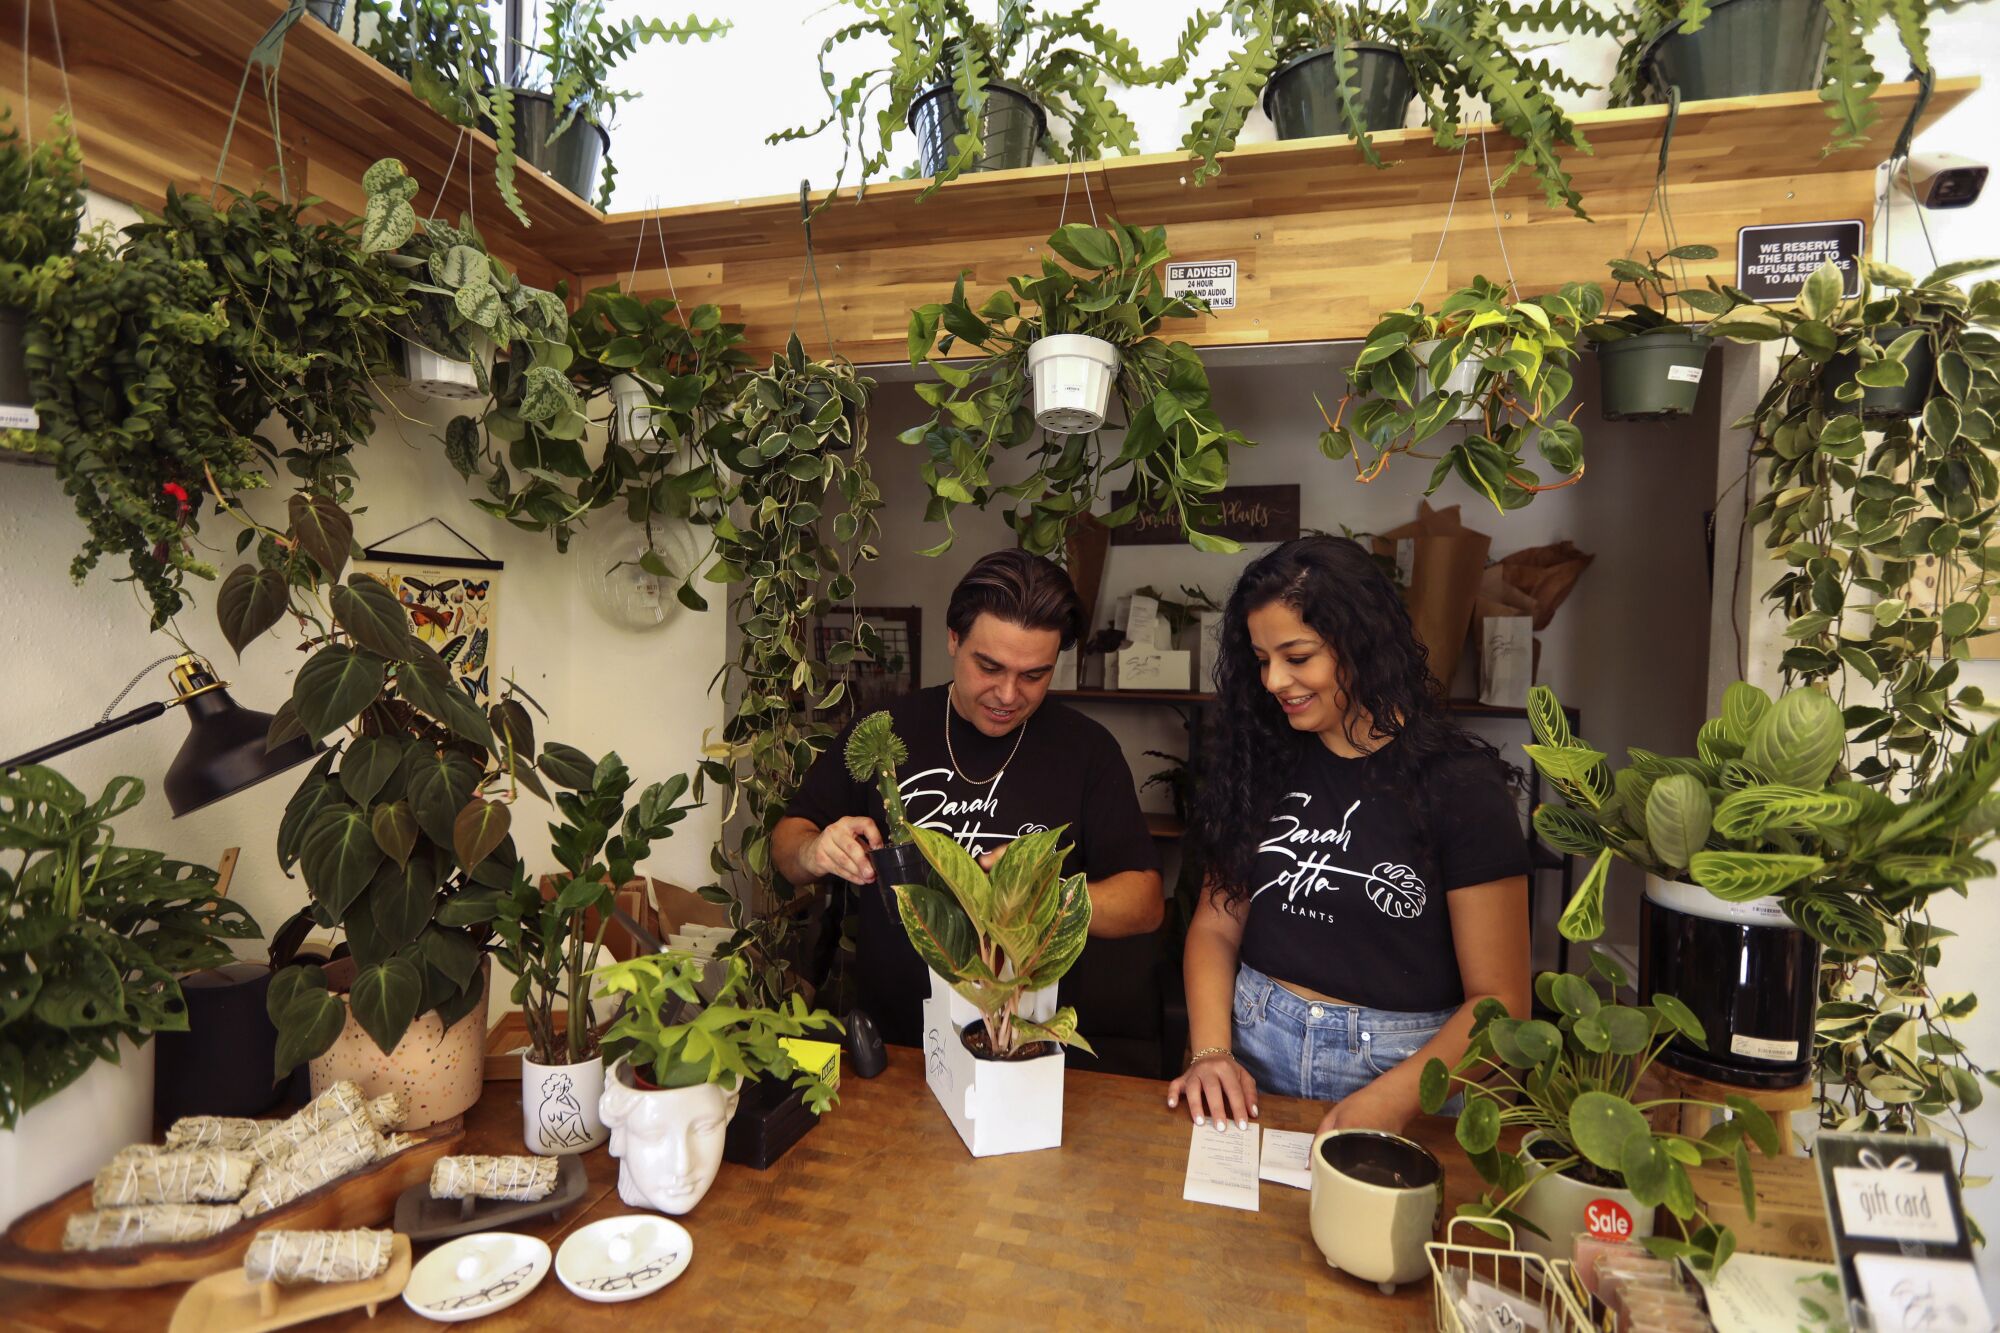 Sara and Tadeh Bazik stand behind the counter of their store surrounded by plants.